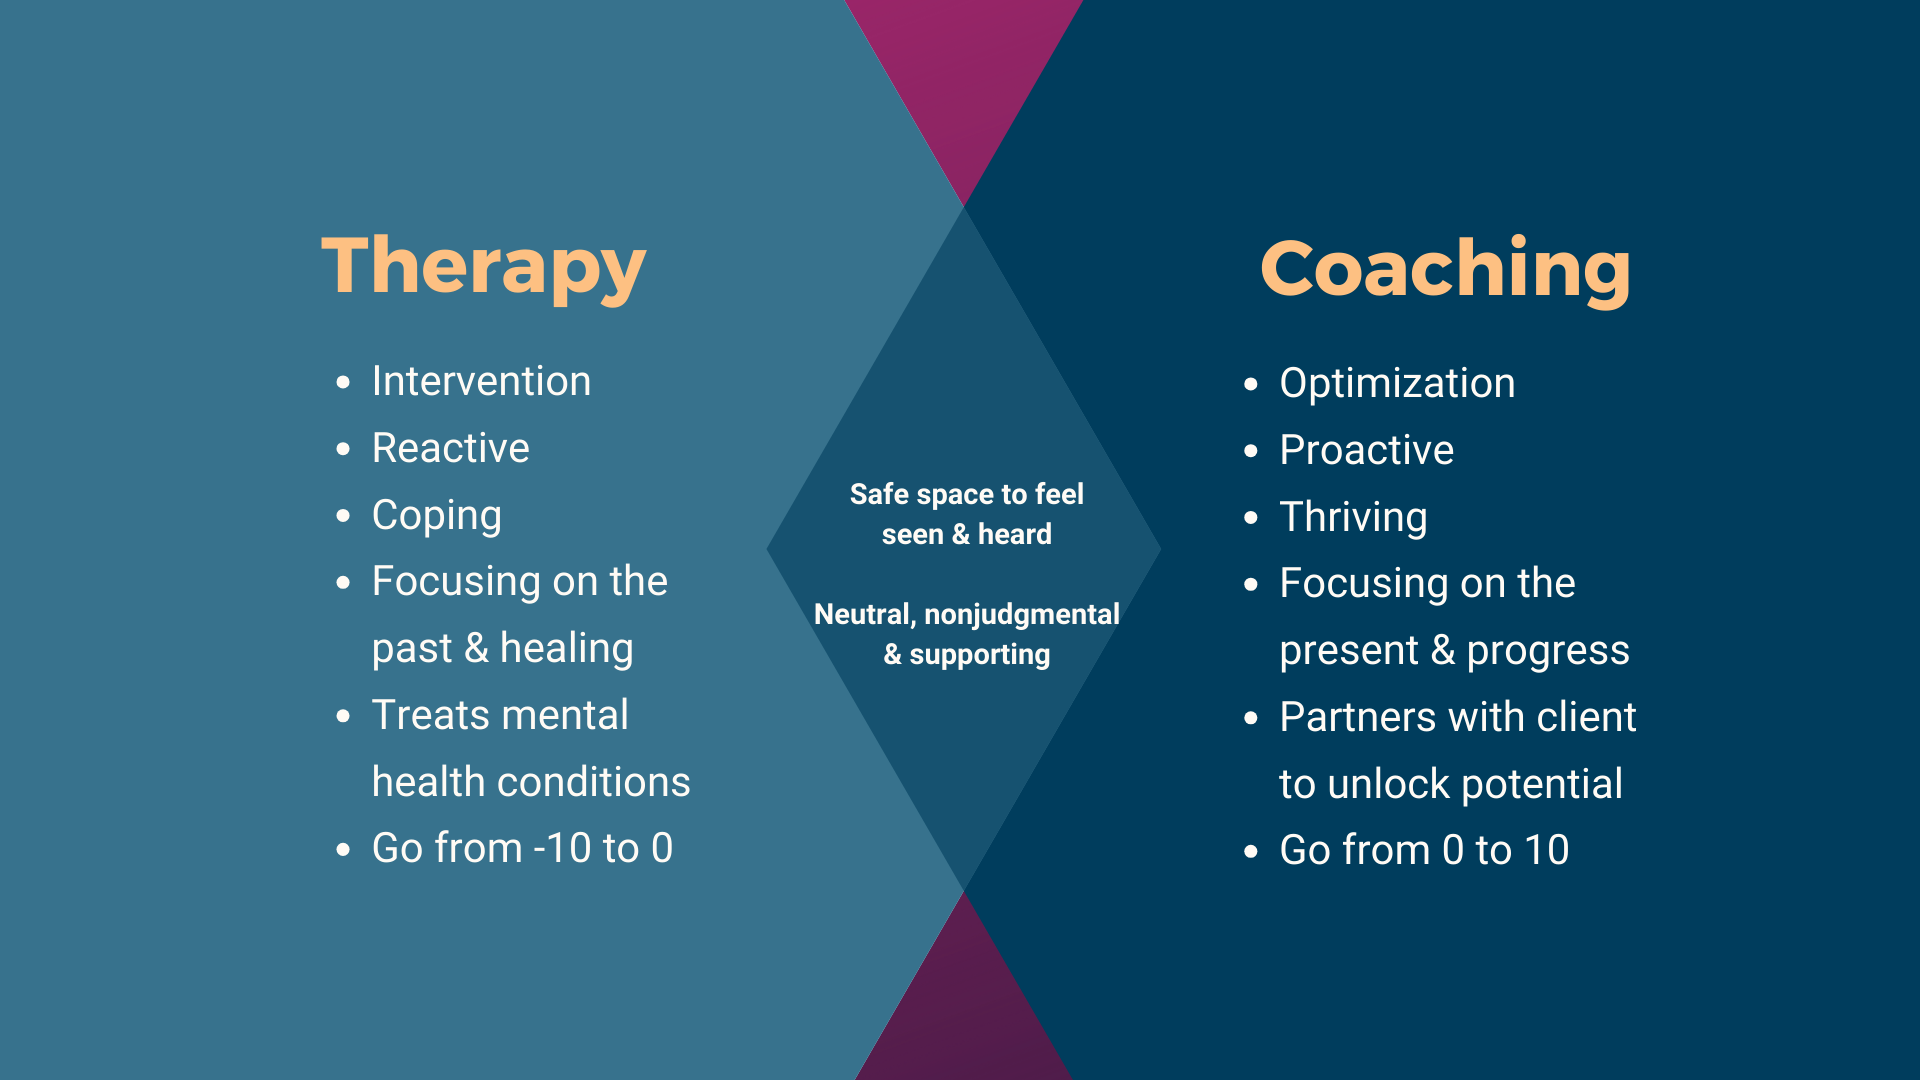 What’s the Difference Between Coaching and Therapy?